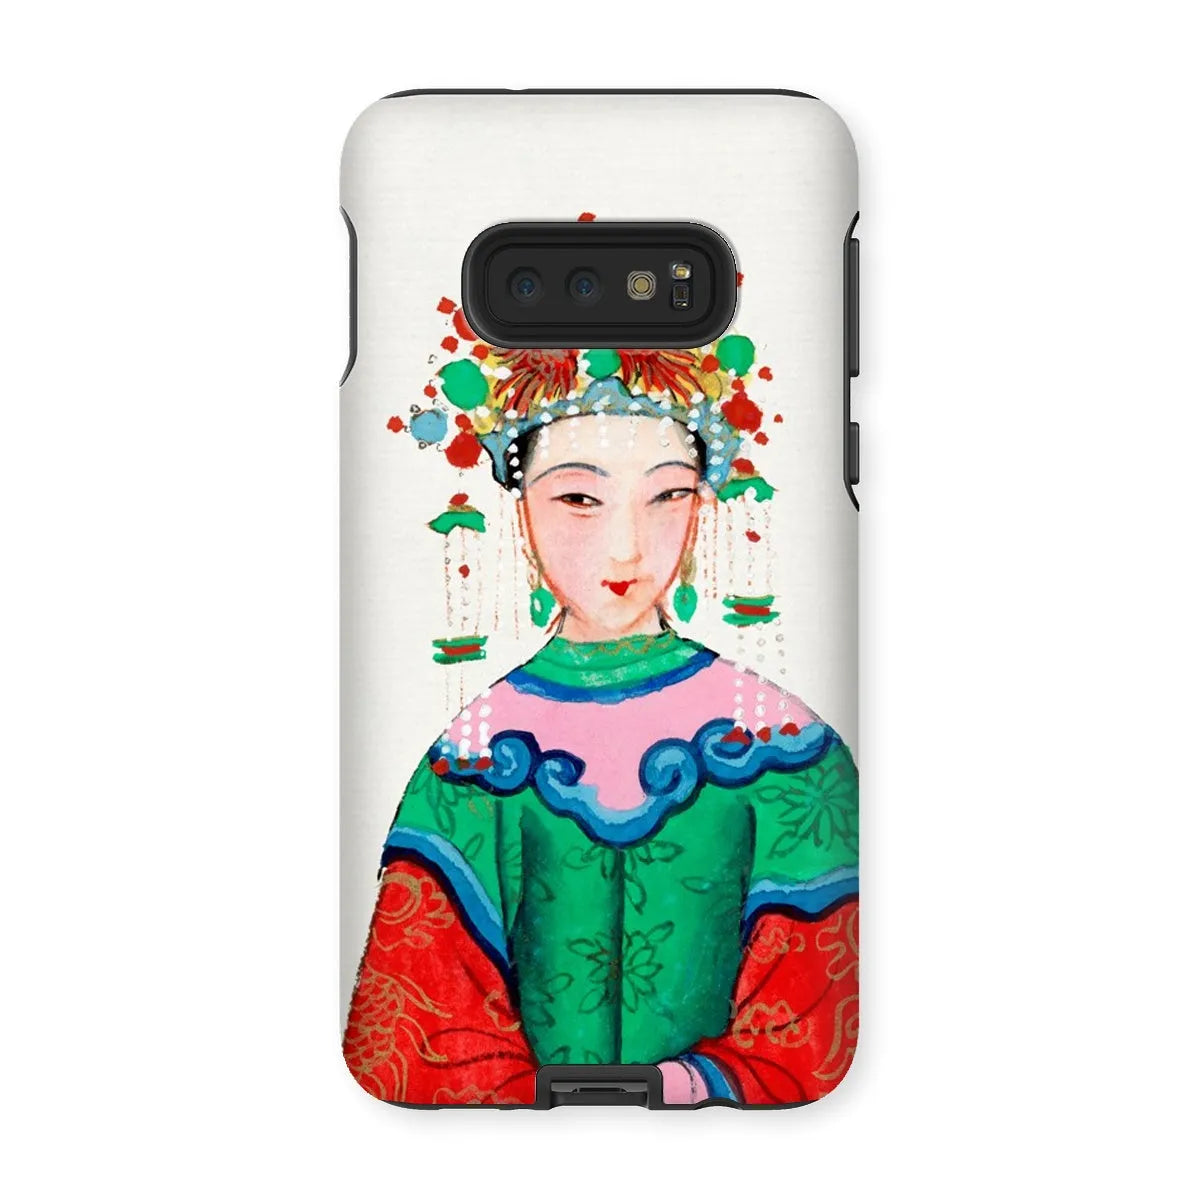 Imperial Princess - Chinese Aesthetic Painting Phone Case - Samsung Galaxy S10e / Matte - Mobile Phone Cases